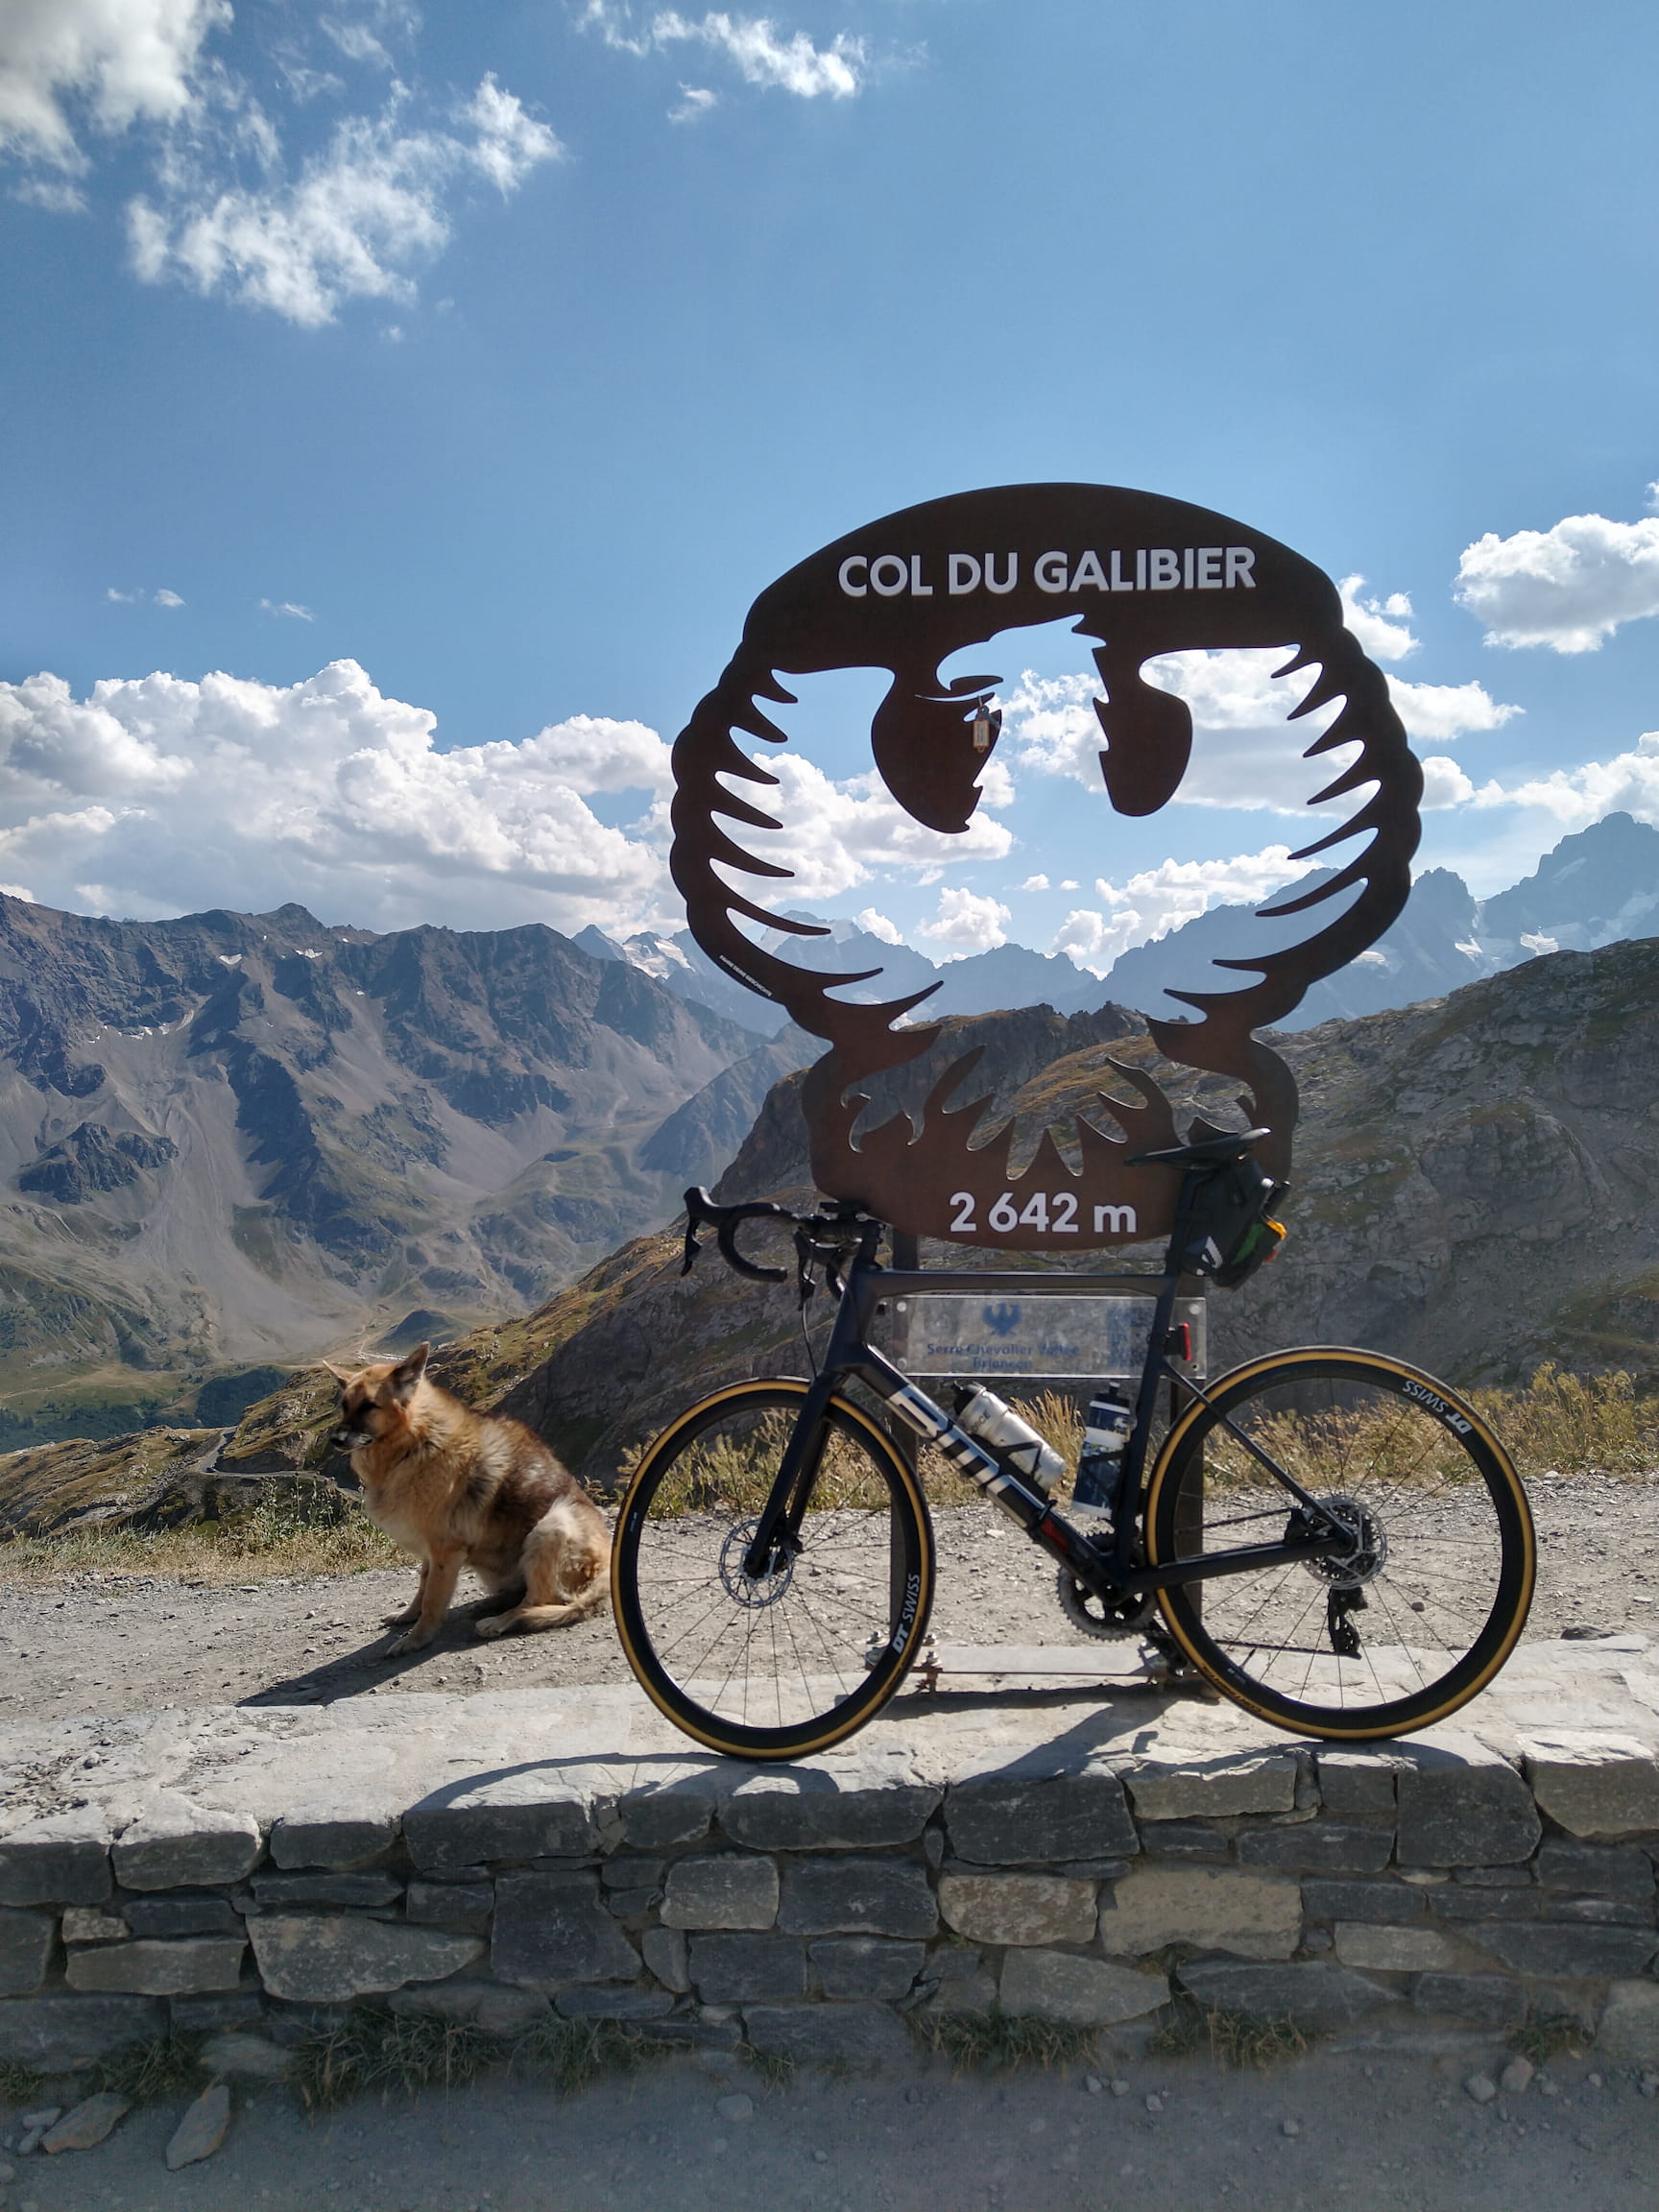 At the top of Col du Galibier